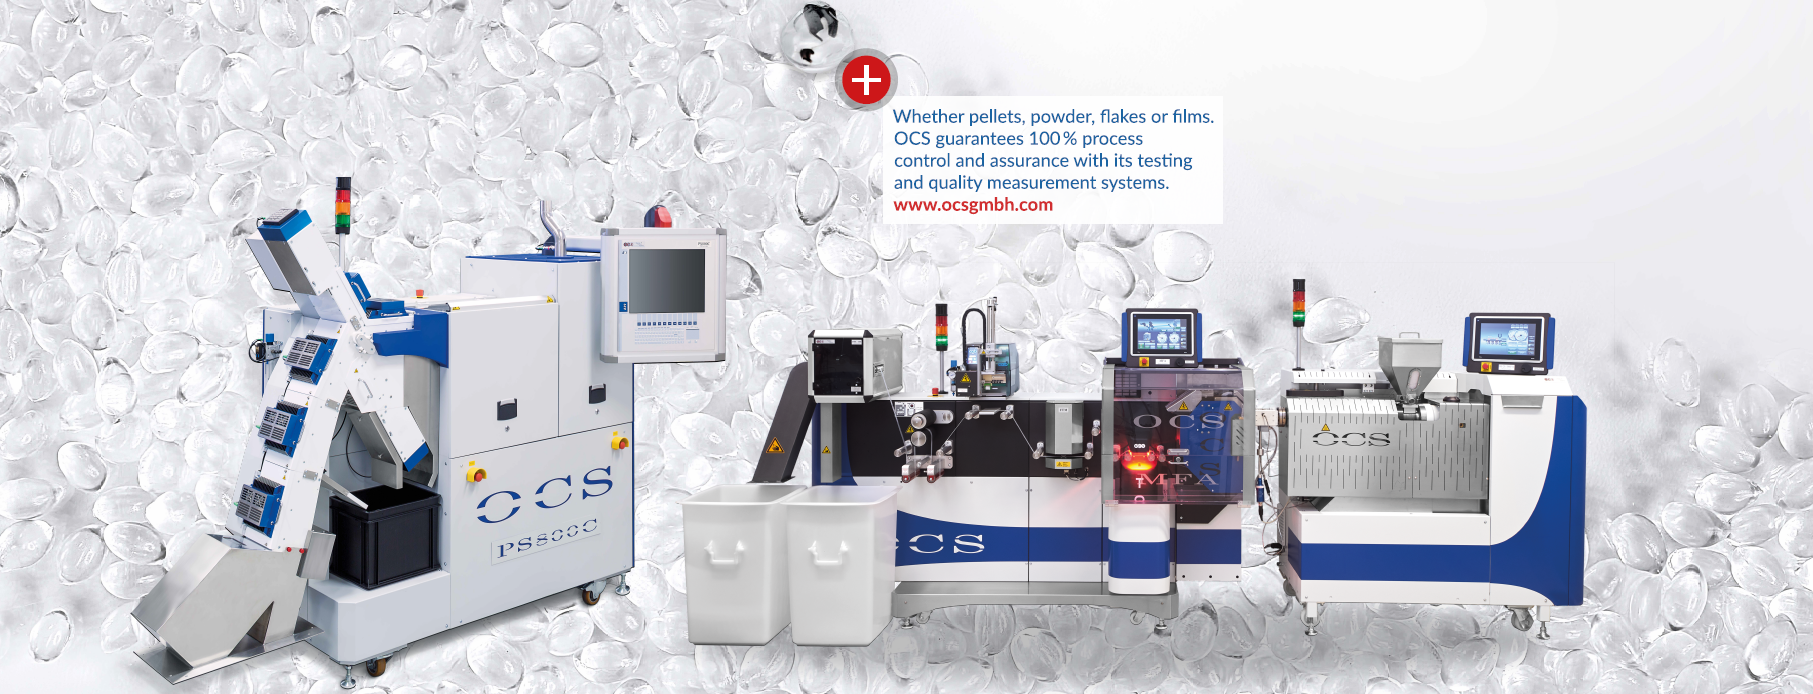 OCS presents product solutions for 100% polymer quality for the cable industry at Wire Düsseldorf